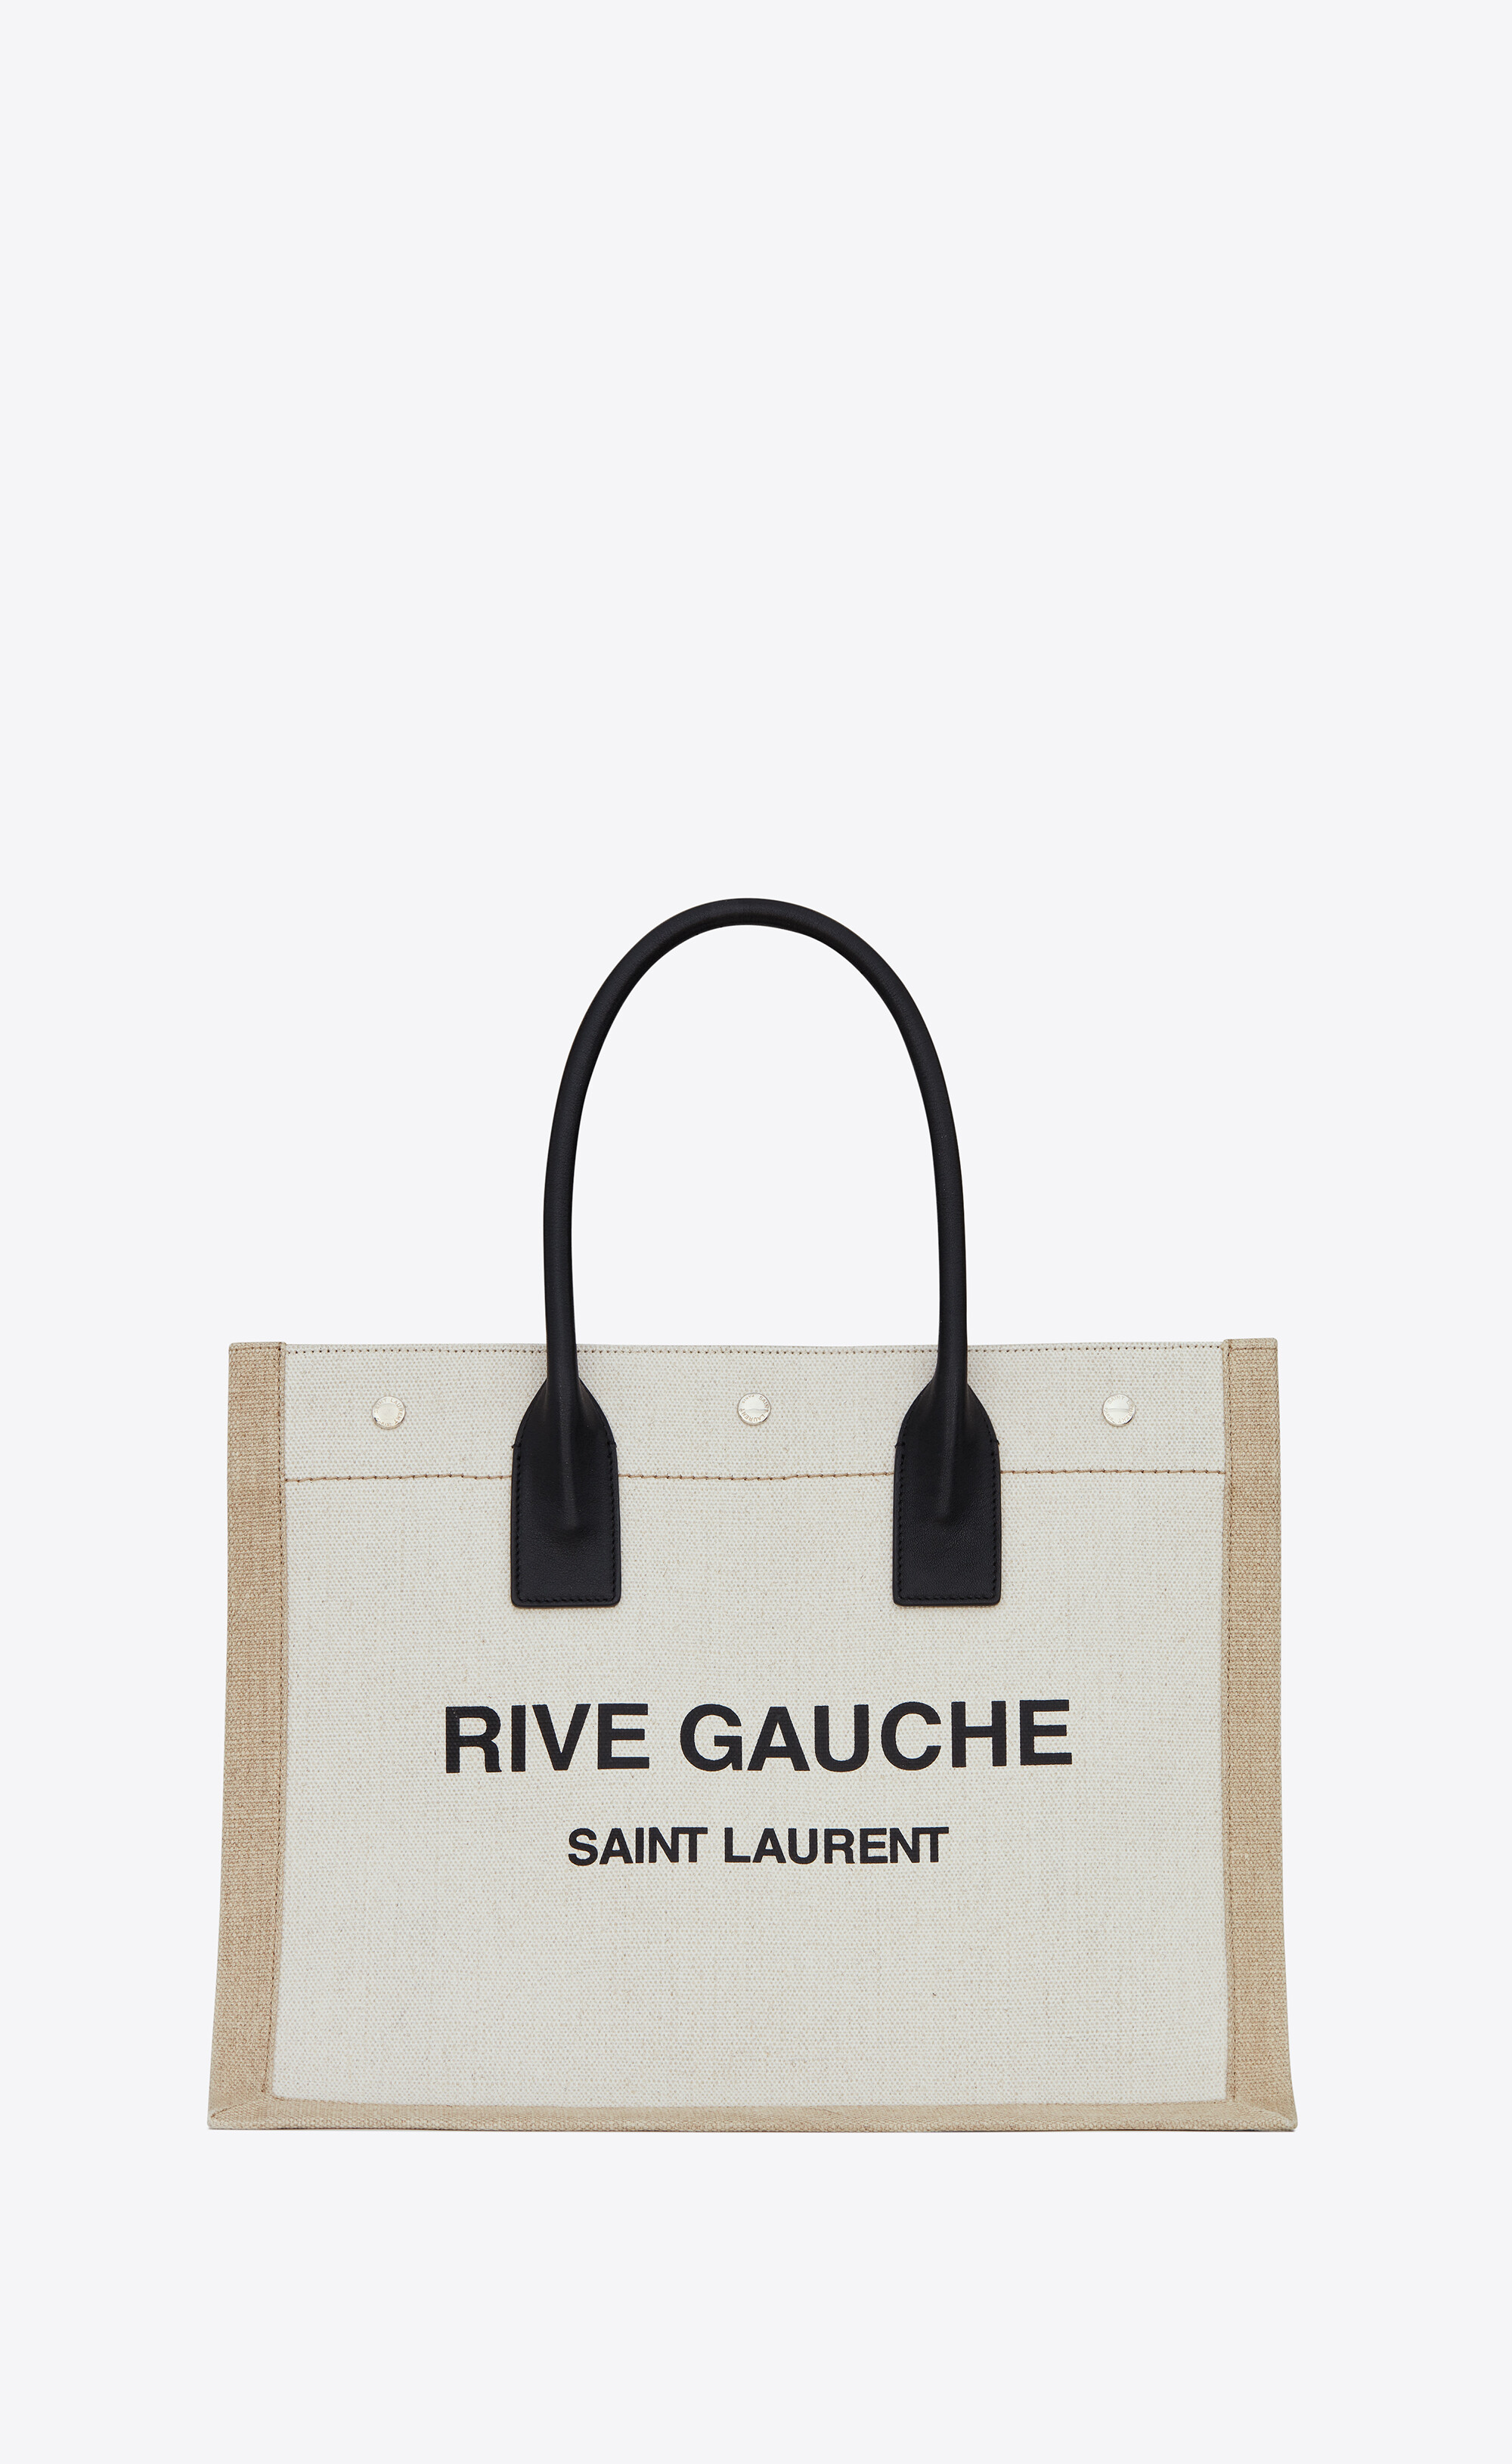 RIVE GAUCHE SMALL TOTE BAG IN LINEN AND LEATHER | Saint Laurent 